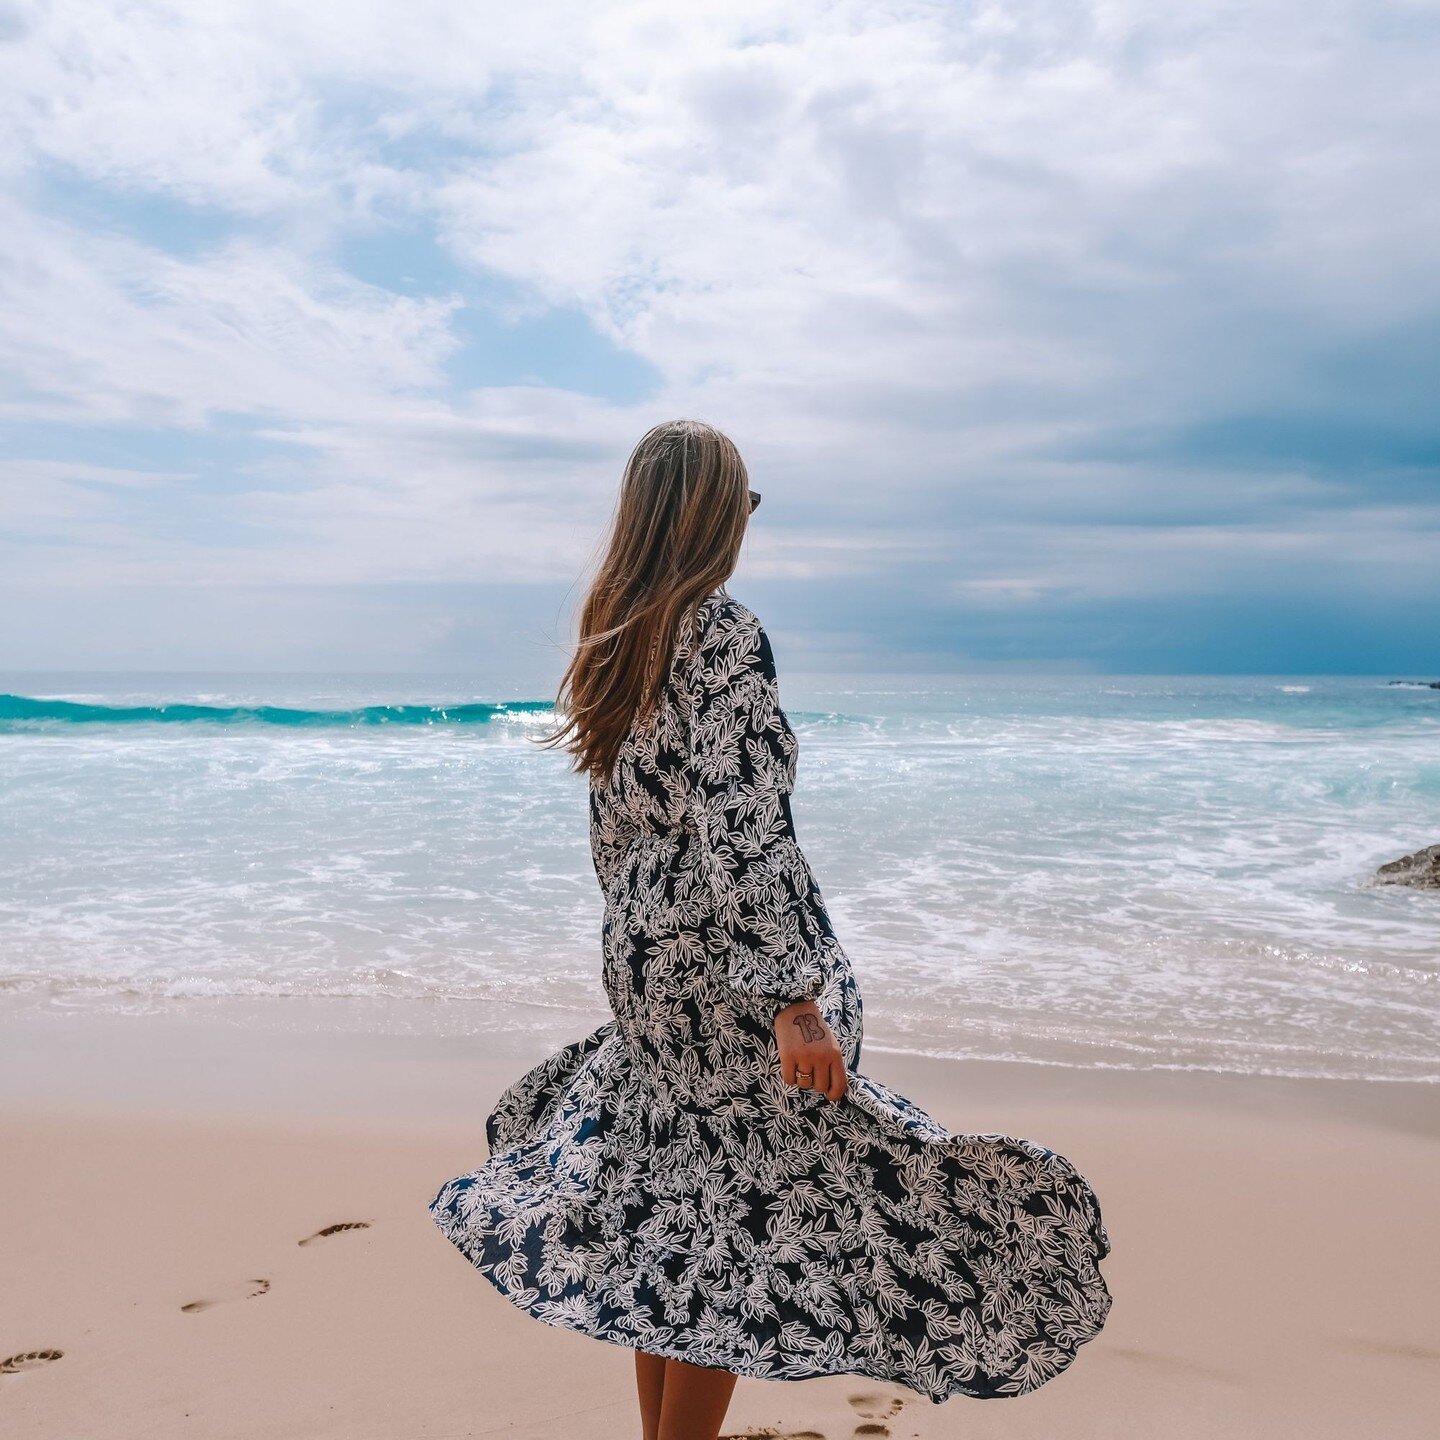 This is one of those dresses that just makes you want to twirl around⁠
⁠
#autumndress #pipinghotaustralia #forcleanoceans